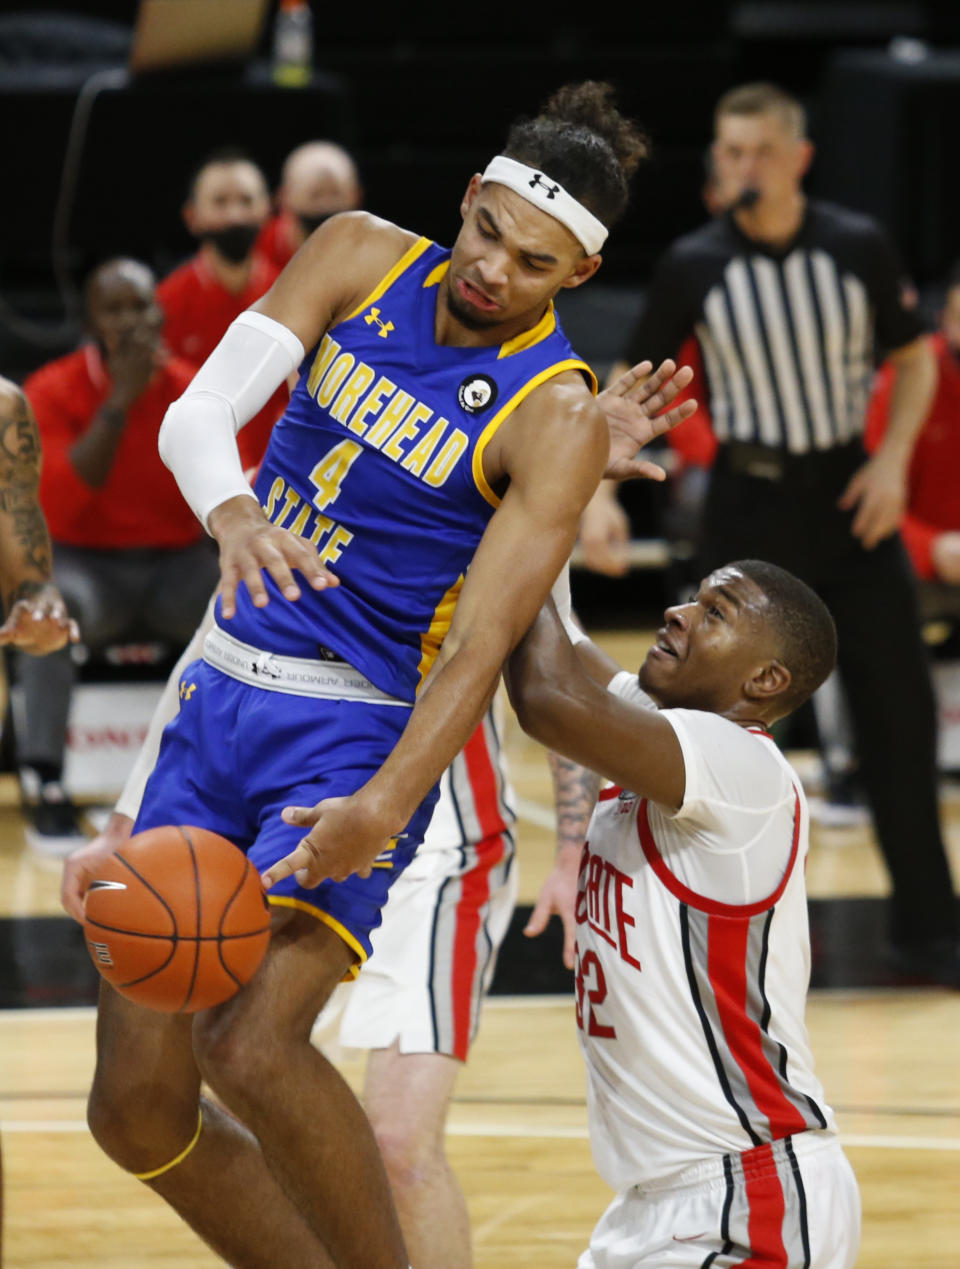 Morehead State forward Johni Broome (4) loses the ball against Ohio State forward E.J. Liddell during the first half of an NCAA college basketball game in Columbus, Ohio, Wednesday, Dec. 2, 2020. (AP Photo/Paul Vernon)